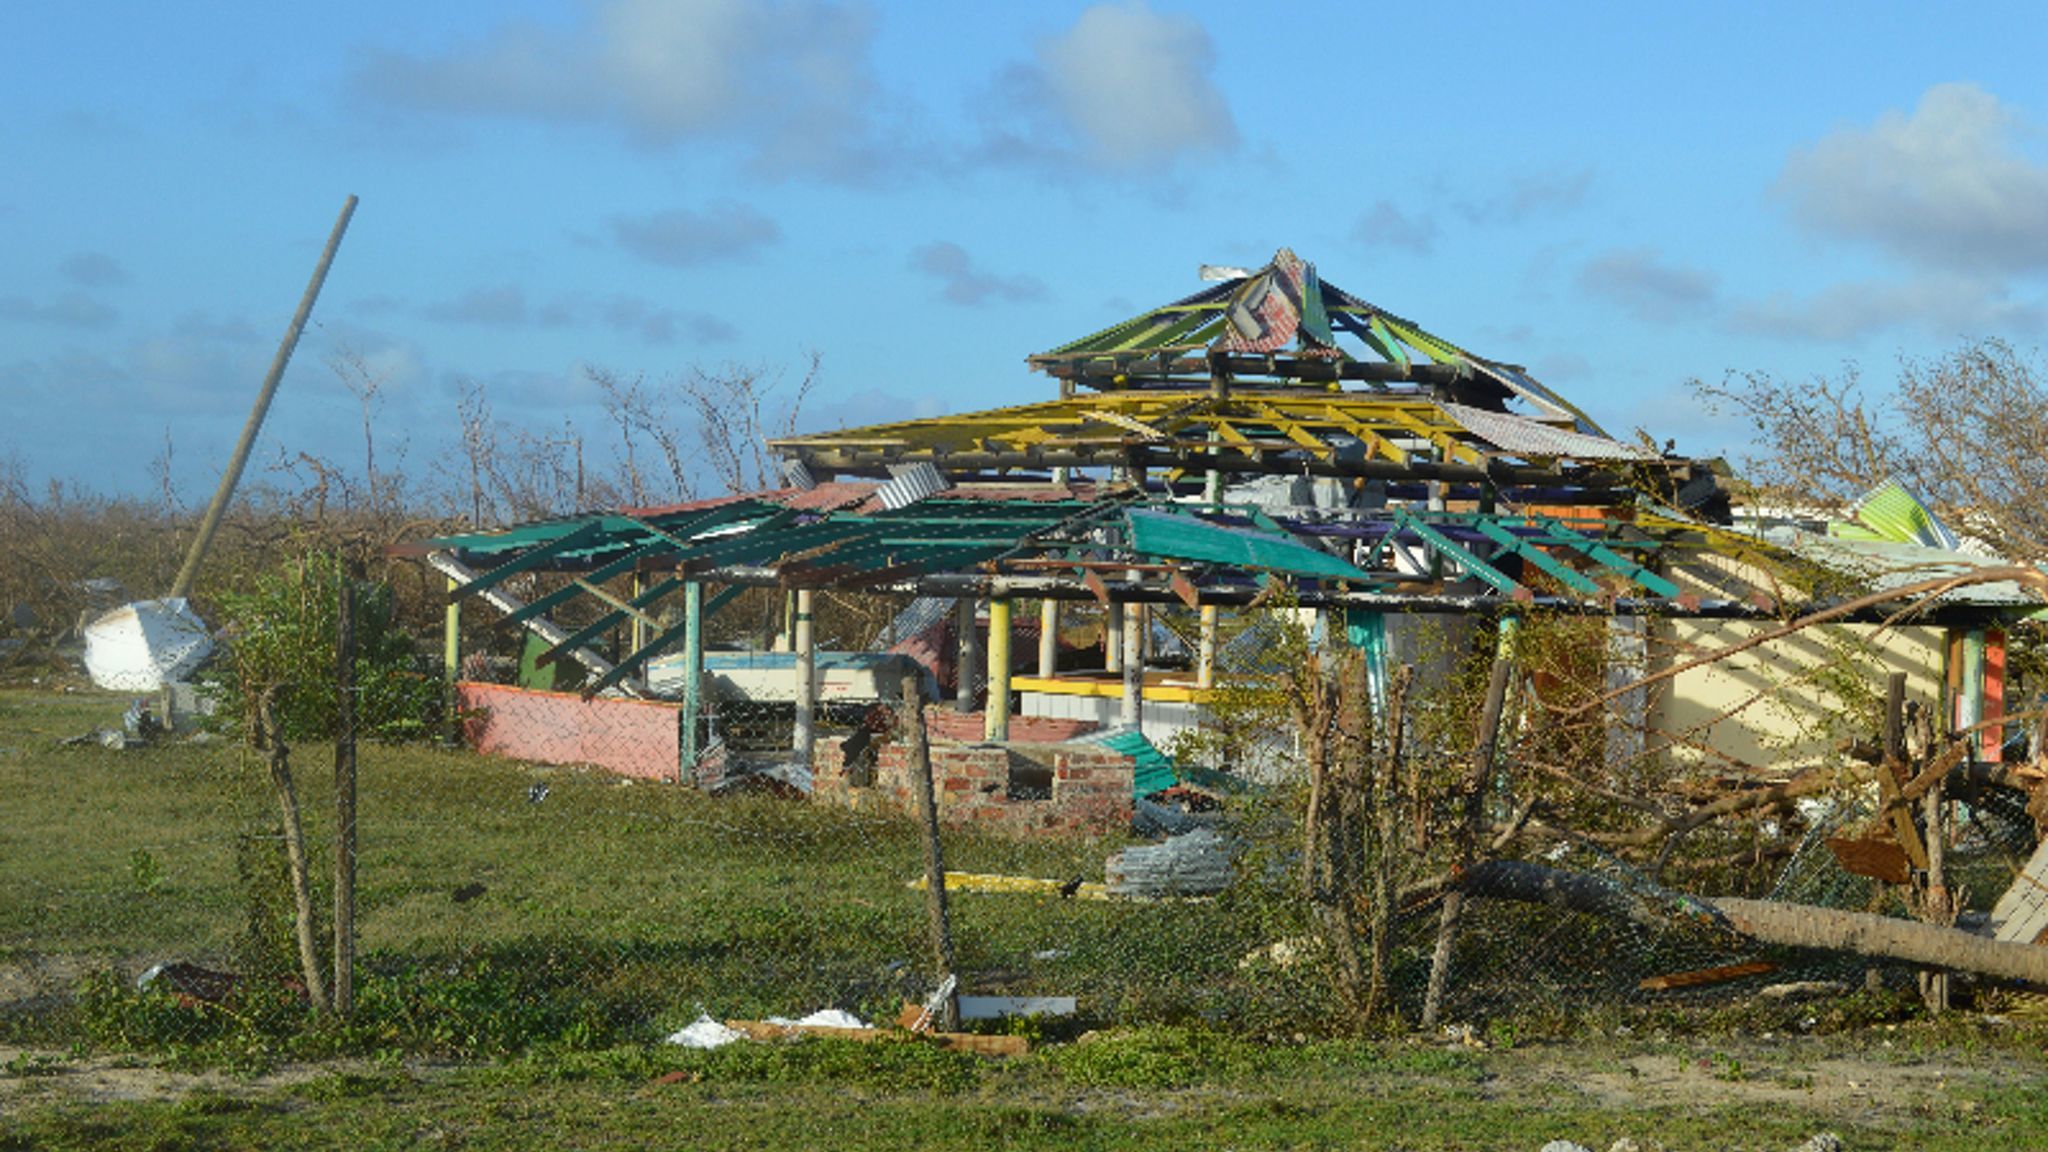 Damage in Barbuda on Sept. 7, after Hurricane Irma.